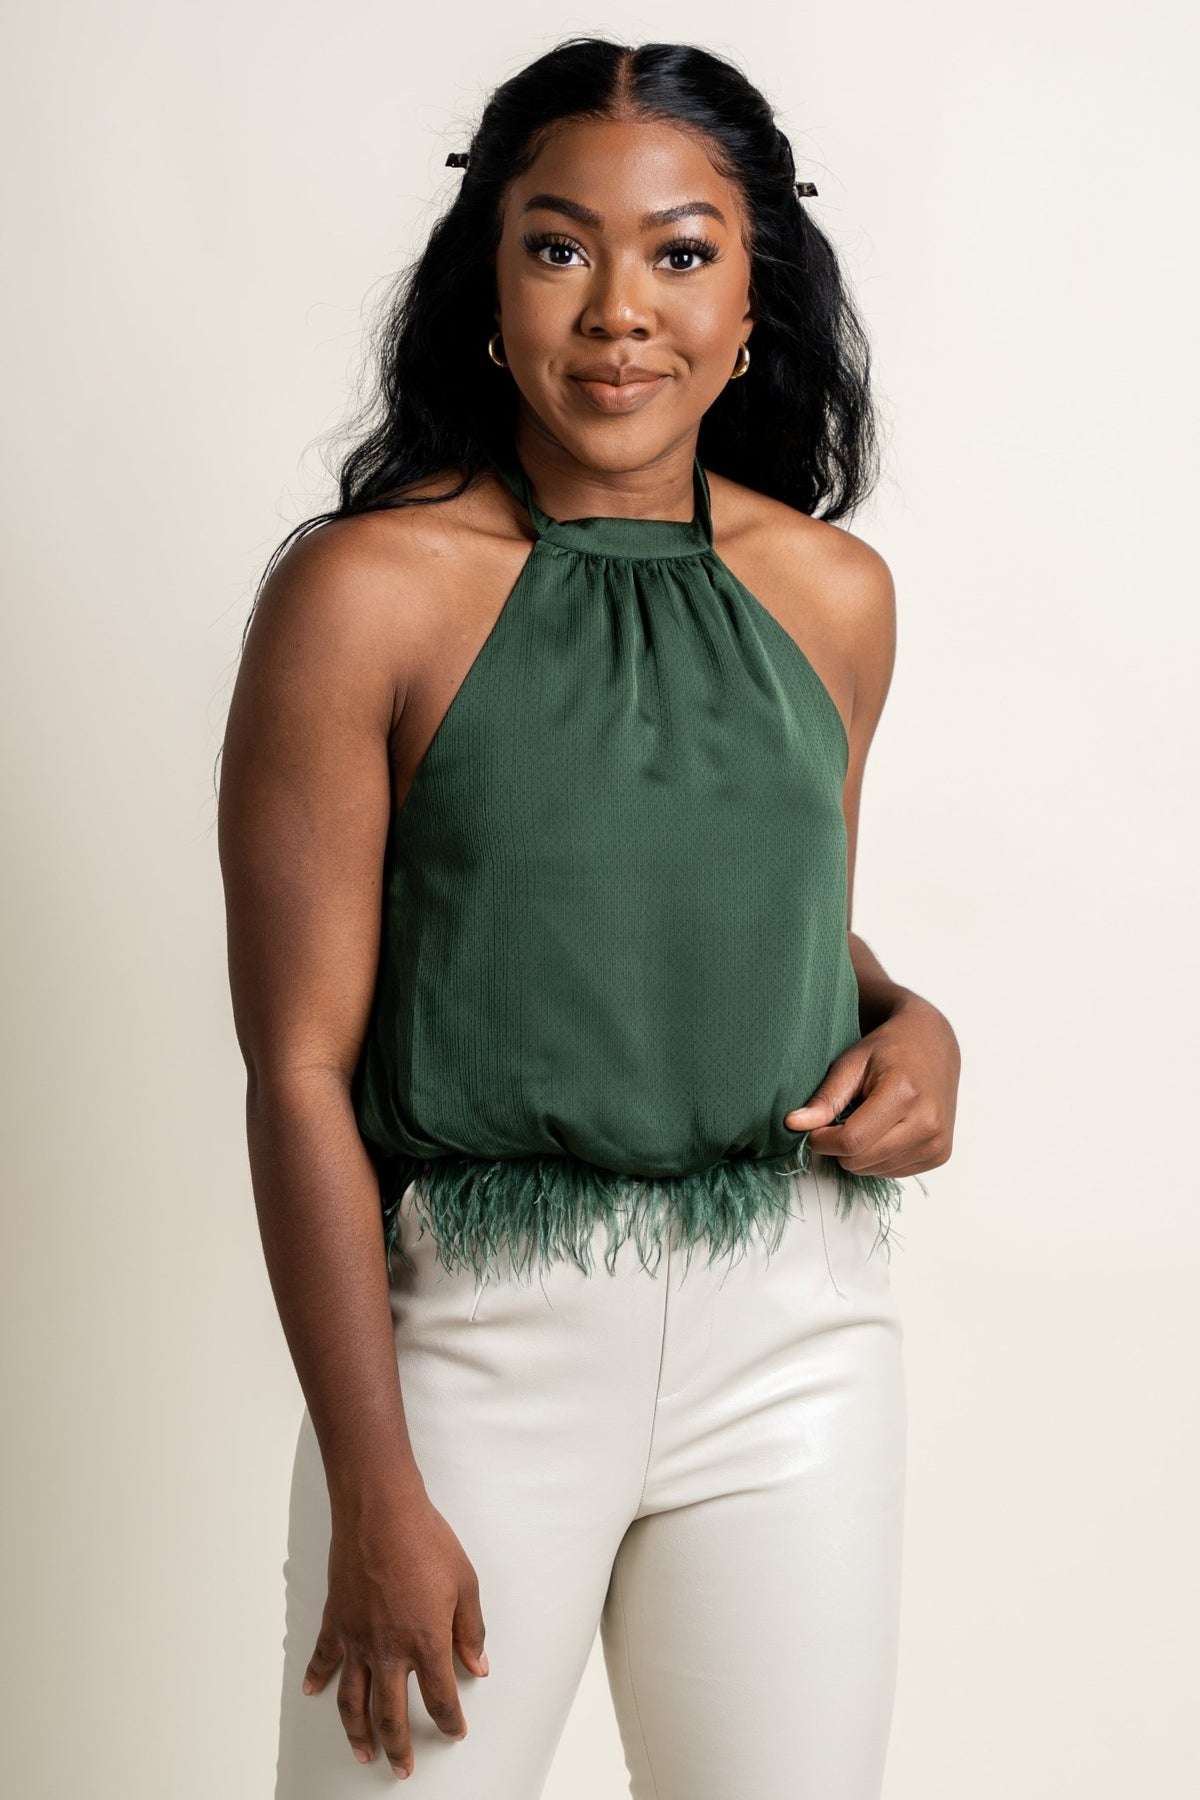 Feather trim halter top emerald - Trendy Holiday Apparel at Lush Fashion Lounge Boutique in Oklahoma City